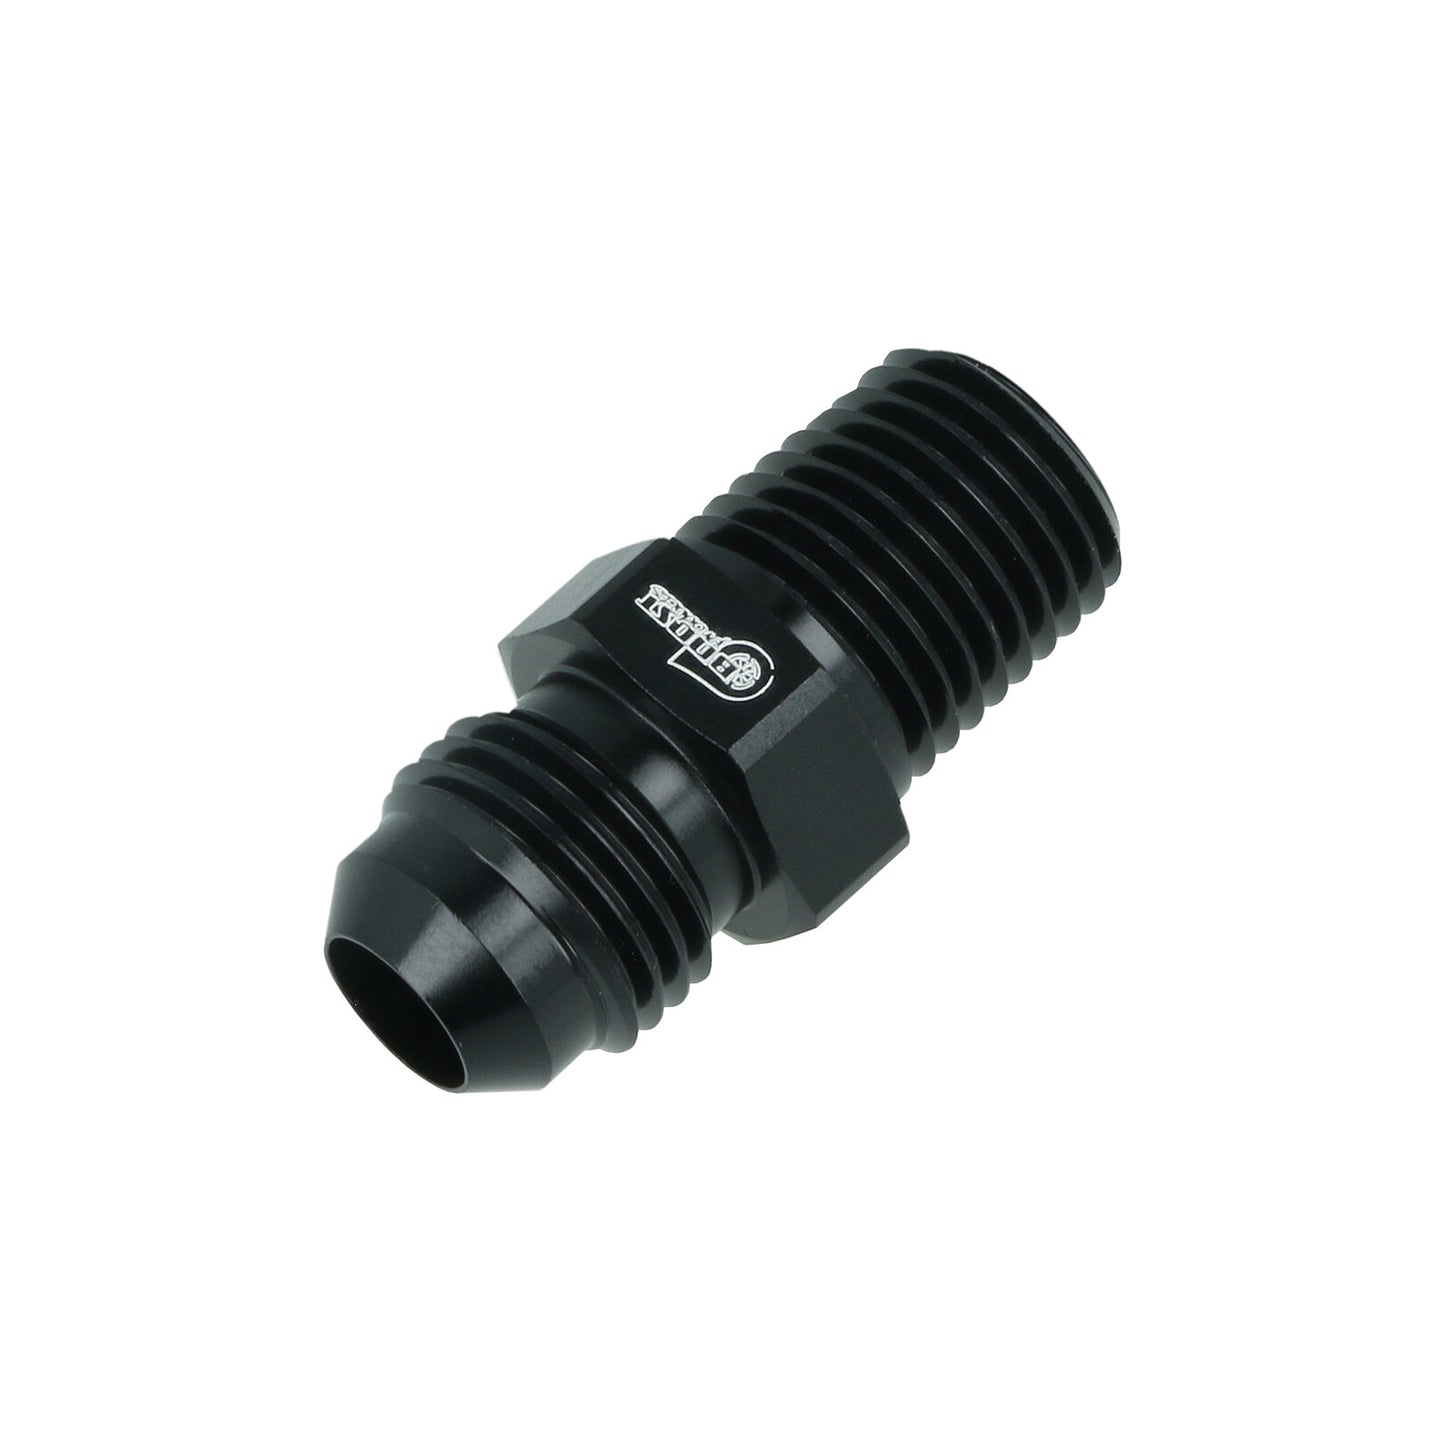 Adapter Dash 6 male to NPT 1/4" male | BOOST products